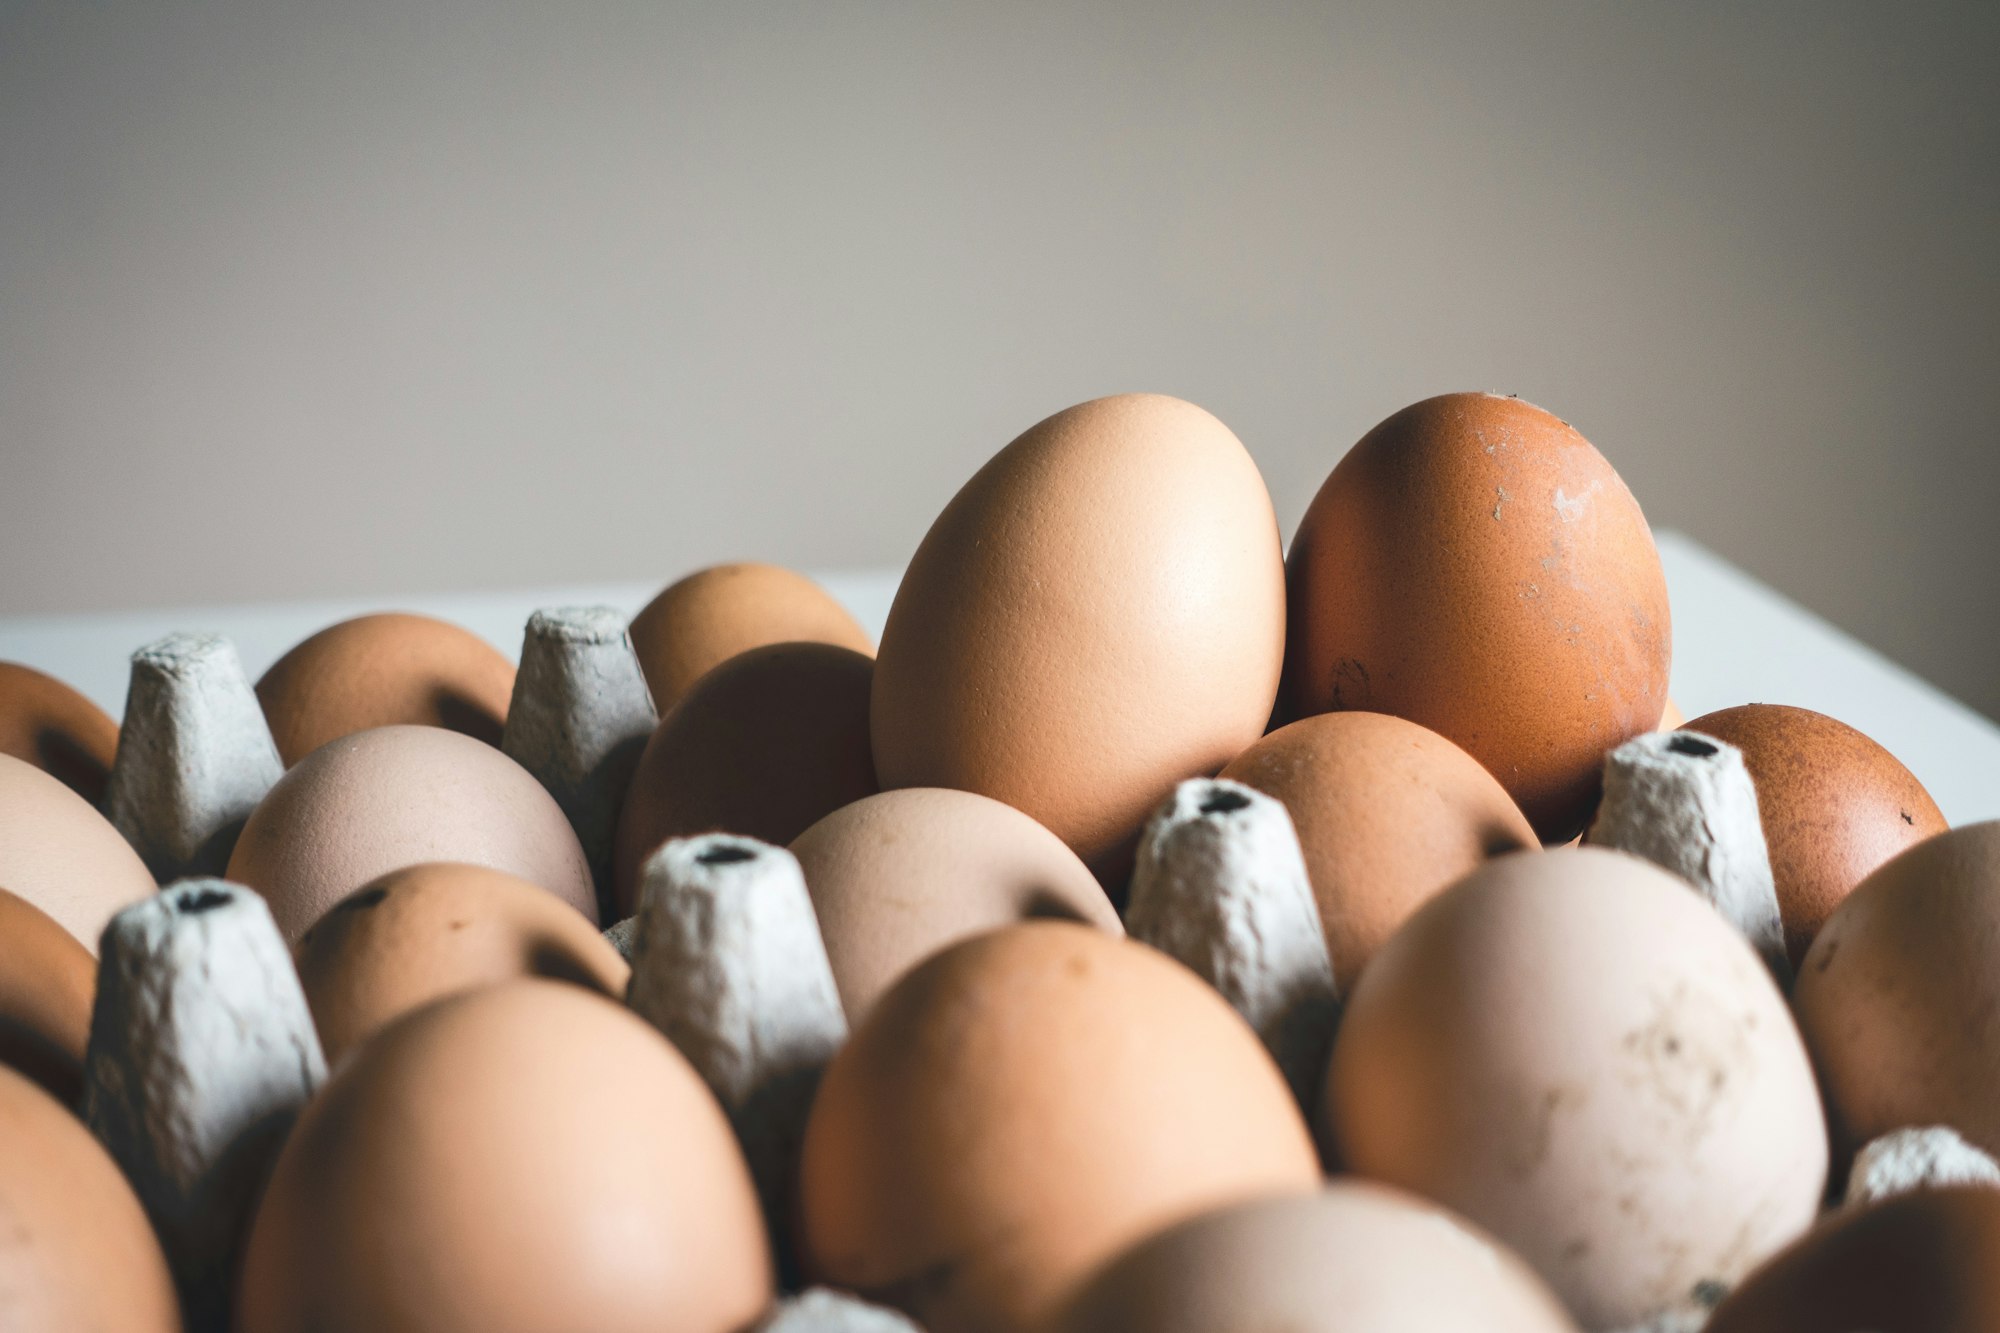 Dietary Cholesterol: Does it Matter?